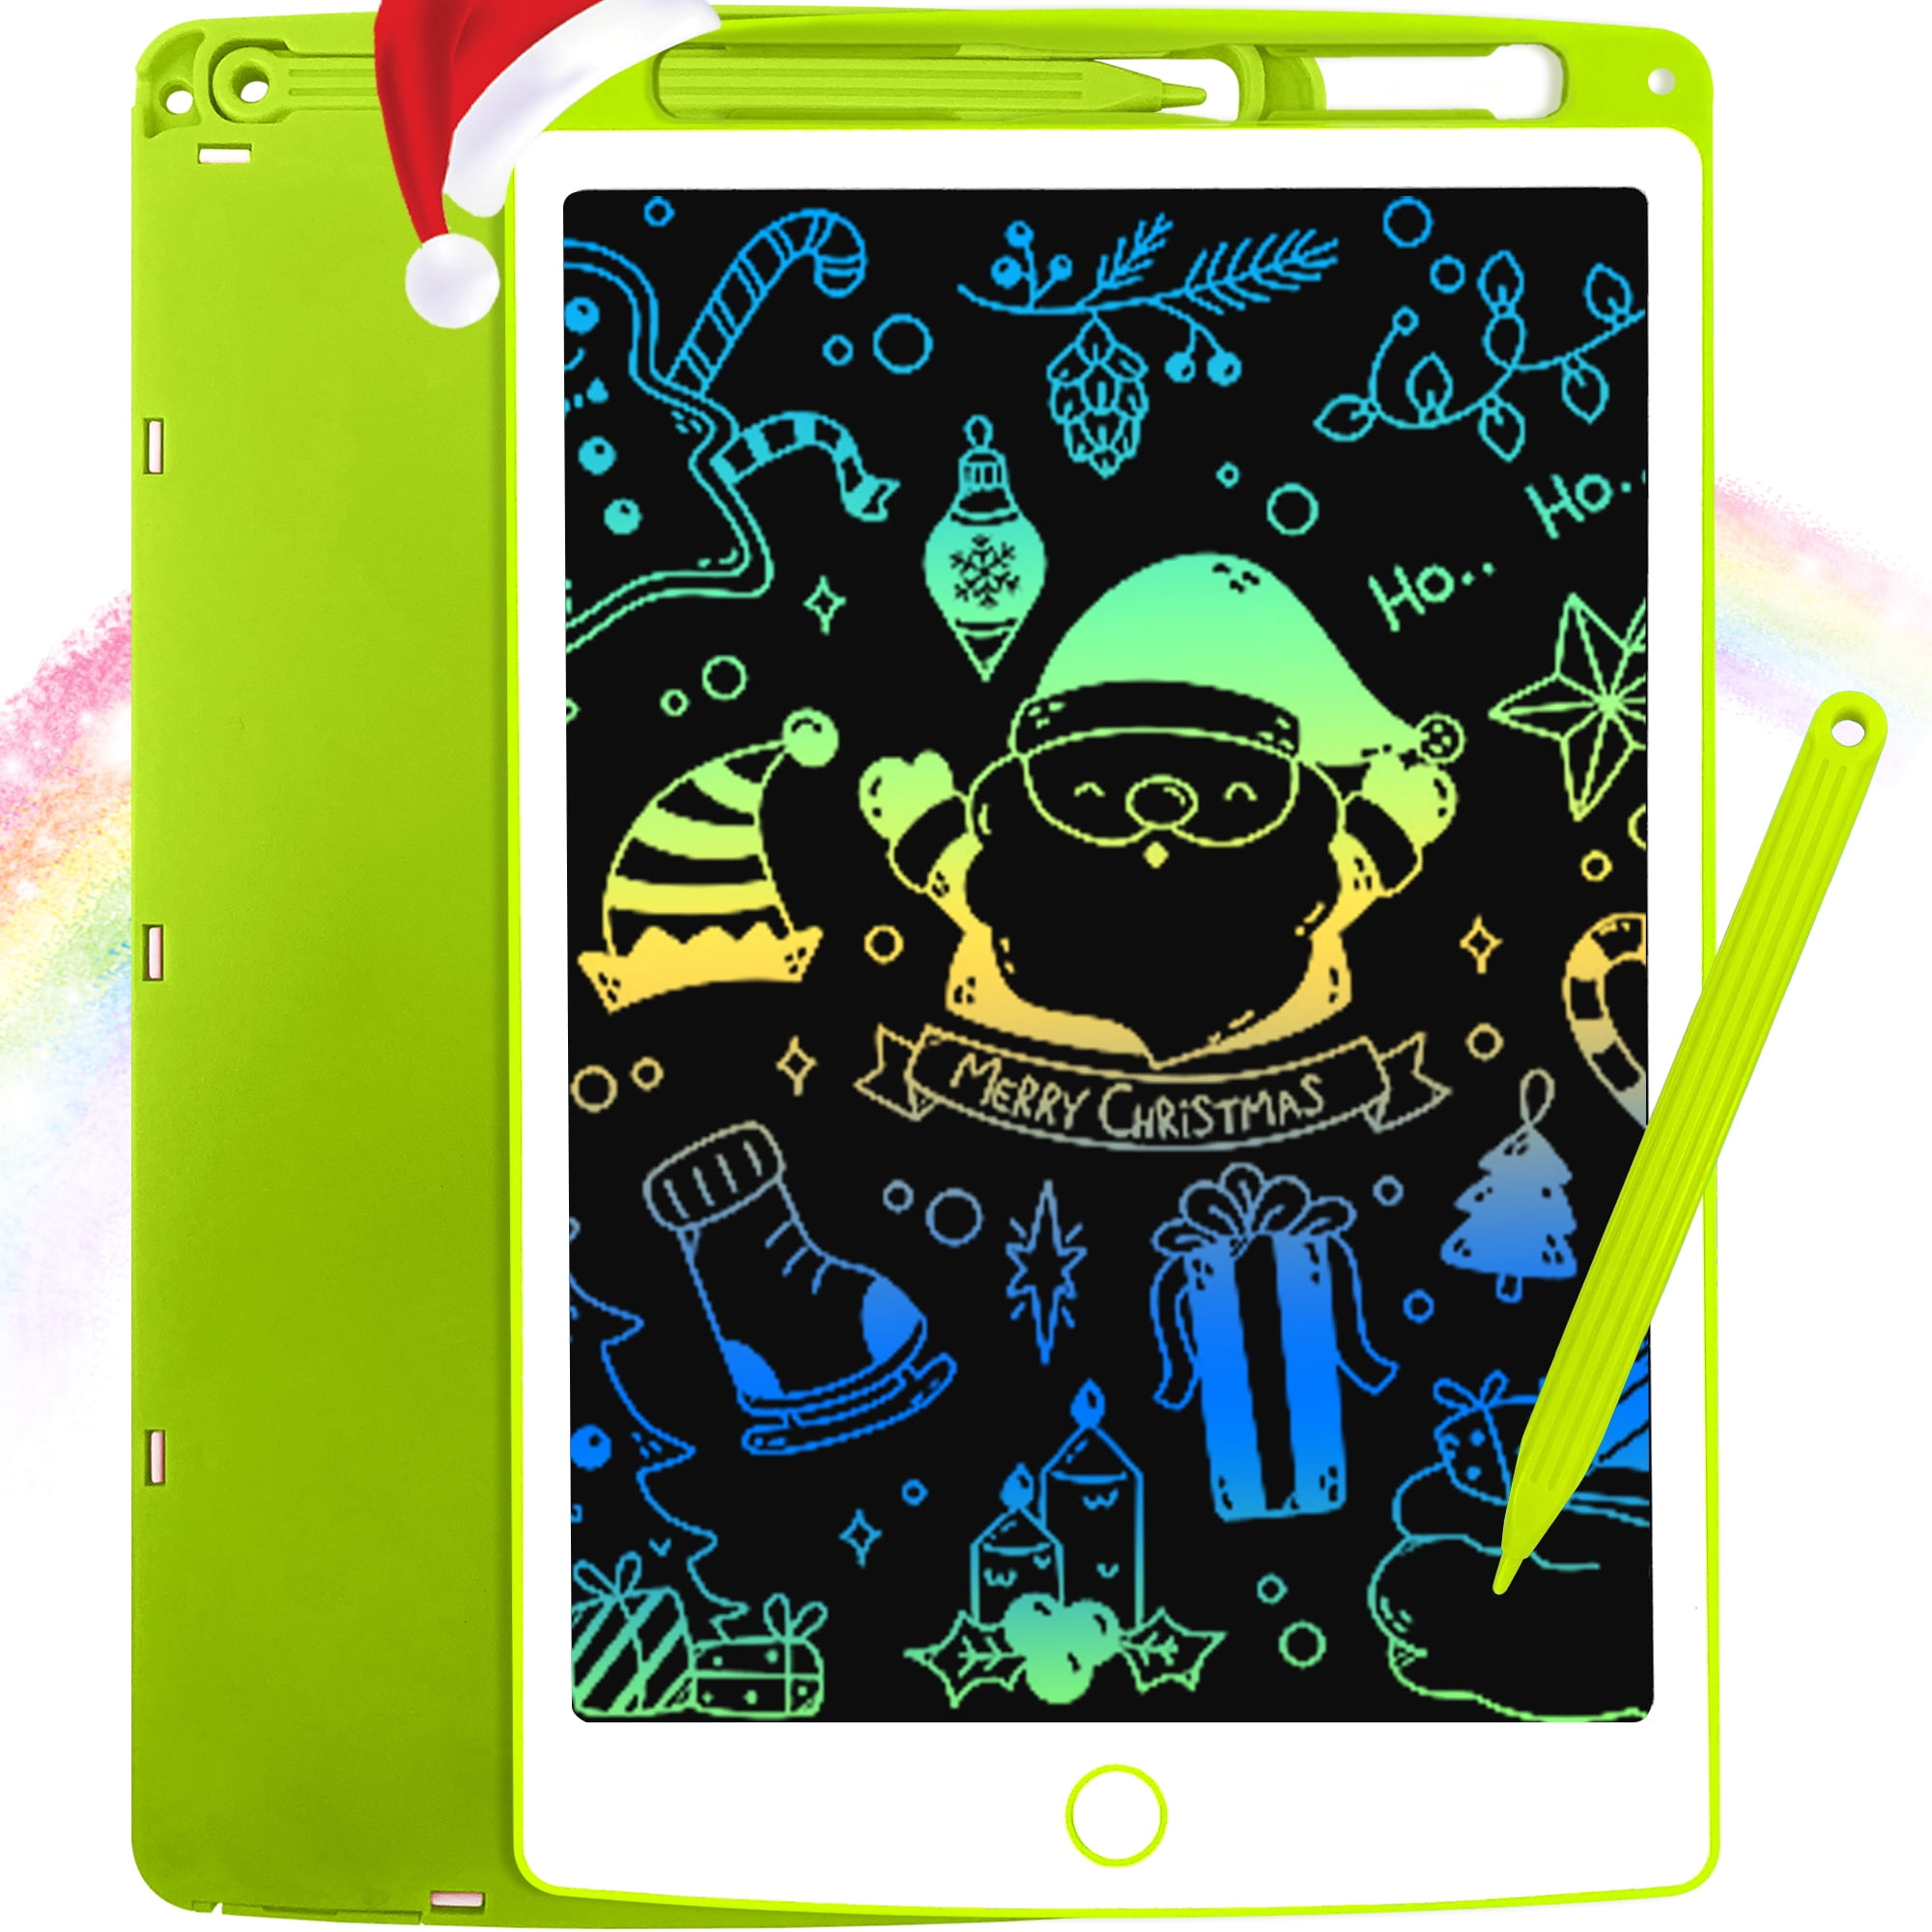 LCD Writing Tablet Xmas Gift for Kids Children Electric Drawing Board  Digital Graphic Drawing Pad with